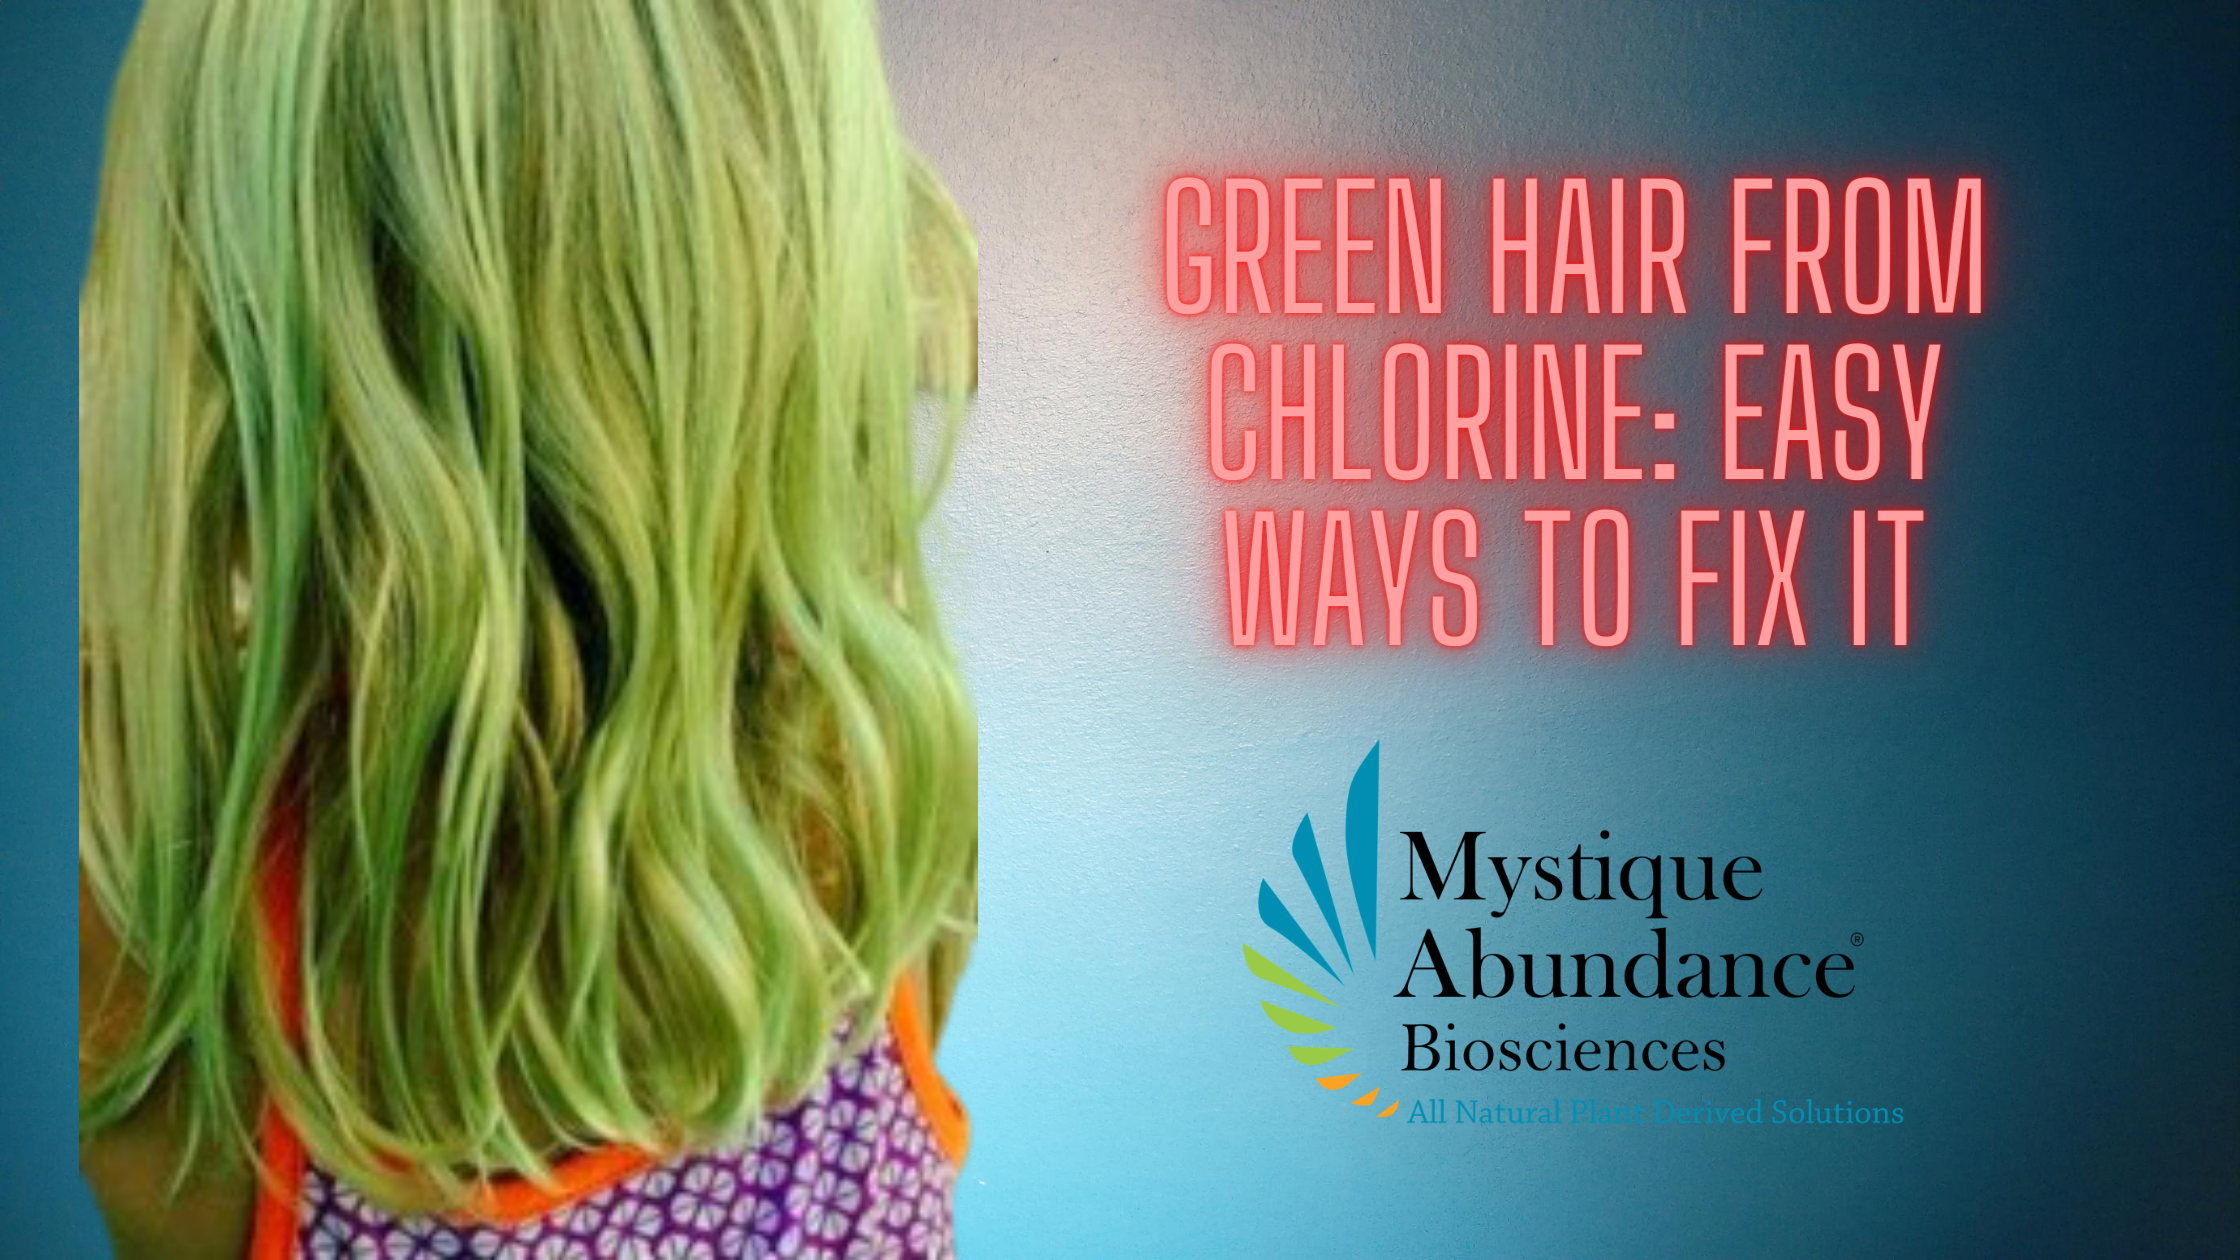 is chlorine bad for your hair